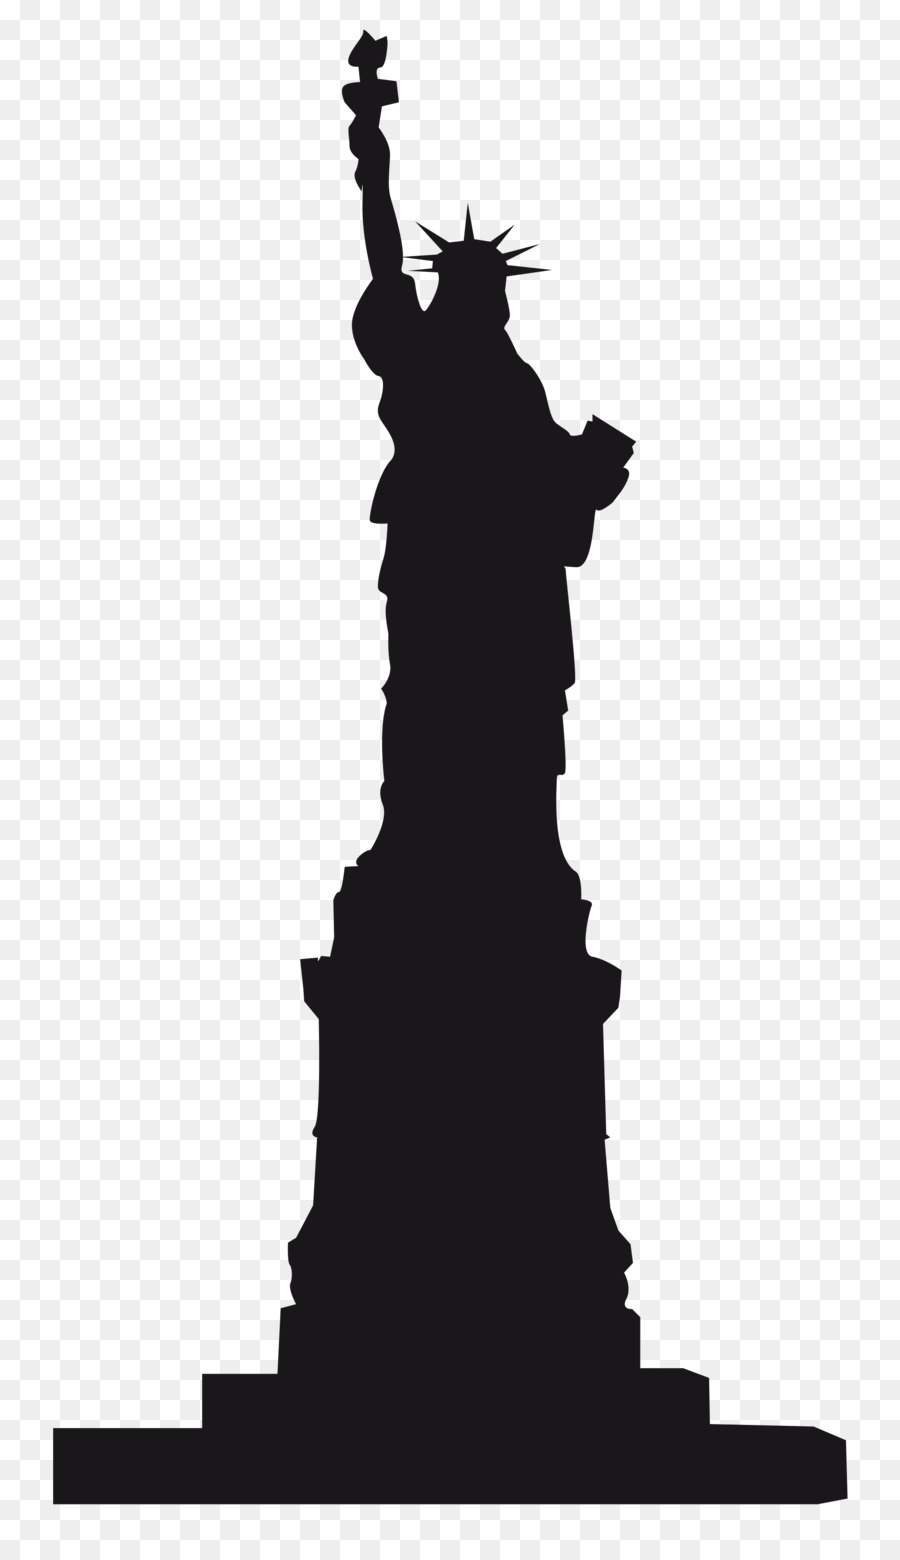 Statue of Liberty Monument Landmark - Statue Of Liberty Silhouette png download - 2000*3435 - Free Transparent Statue Of Liberty png Download.